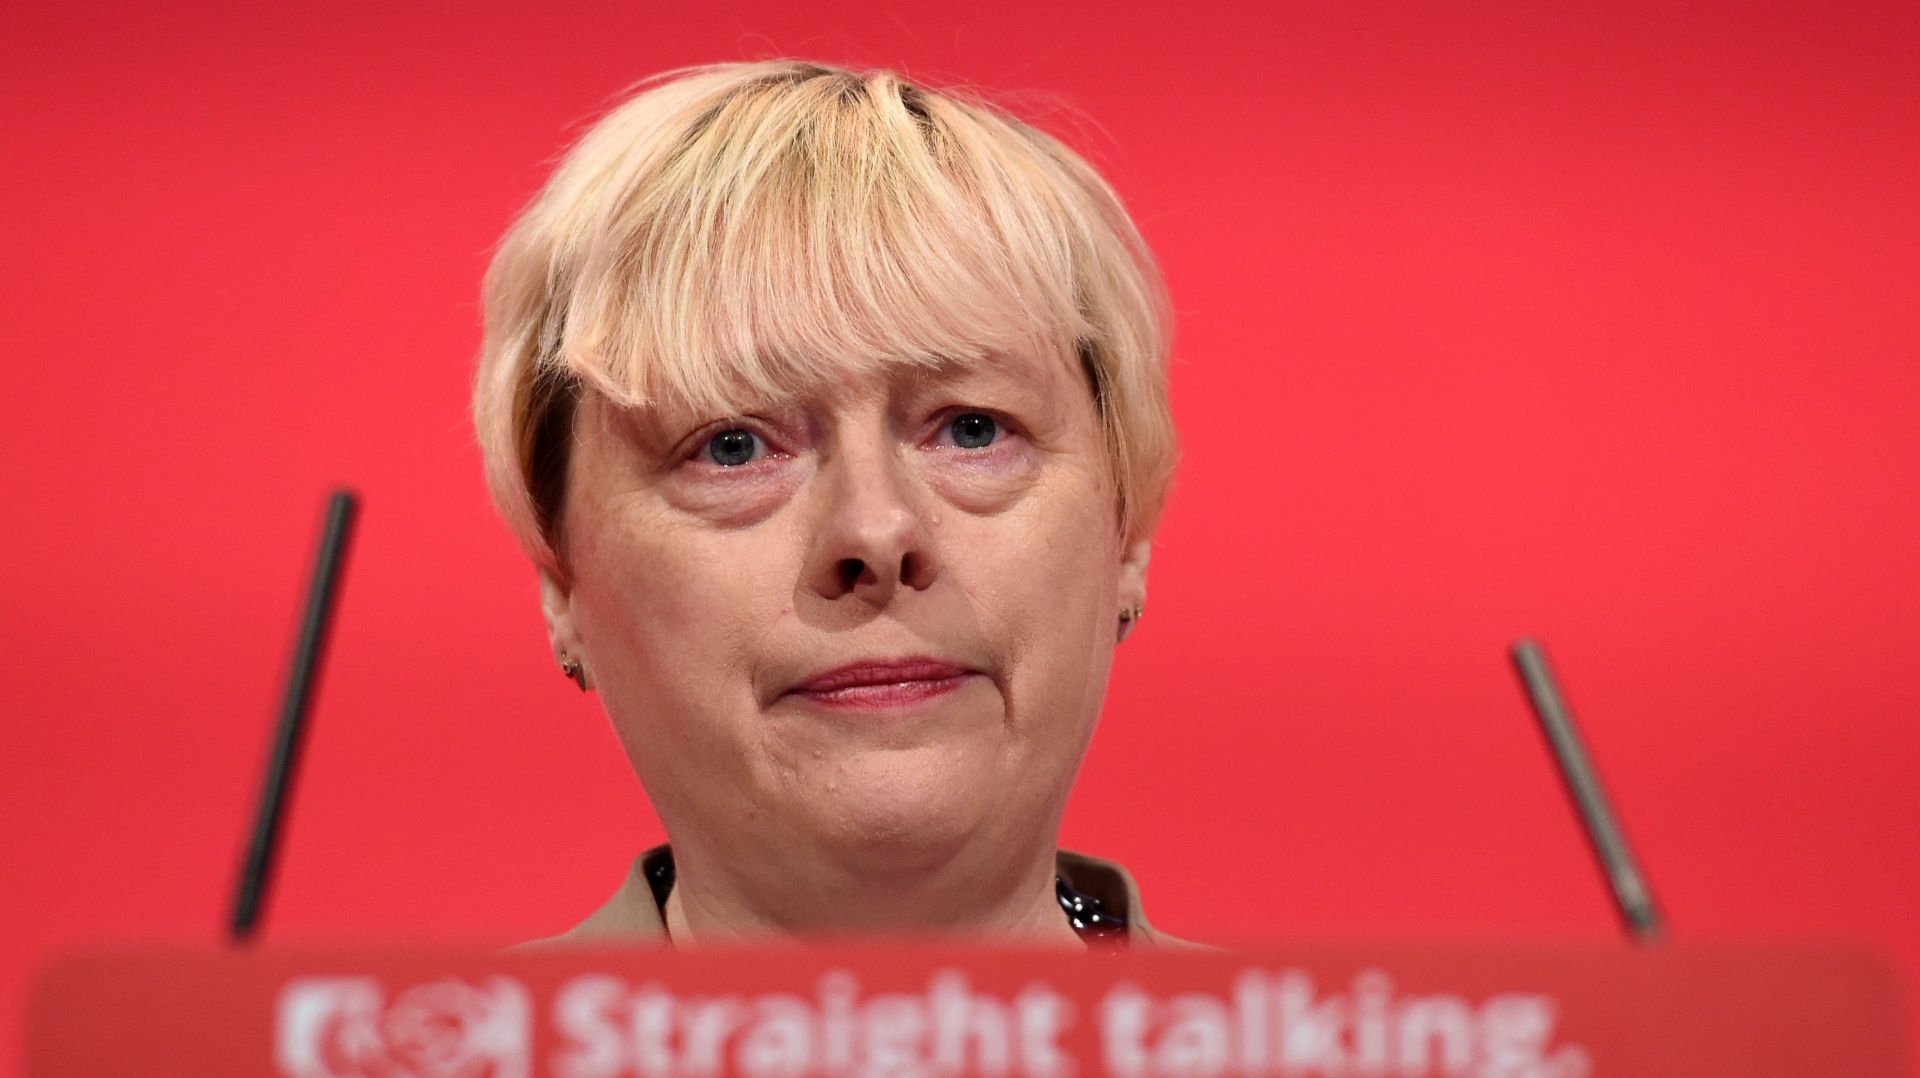 epa05416749 (FILE) A file photgraph showing British Shadow Secretary of State for Business, Innovation and Skills, Angela Eagle delivering a speech during the first day of the Labour Conference in Brighton, Britain, 27 September 2015. Media reports on 09 July 2016 state that Angela Eagle is to announce a bid for leadership of Labour Party on 11 July 2016.  EPA/FACUNDO ARRIZABALAGA